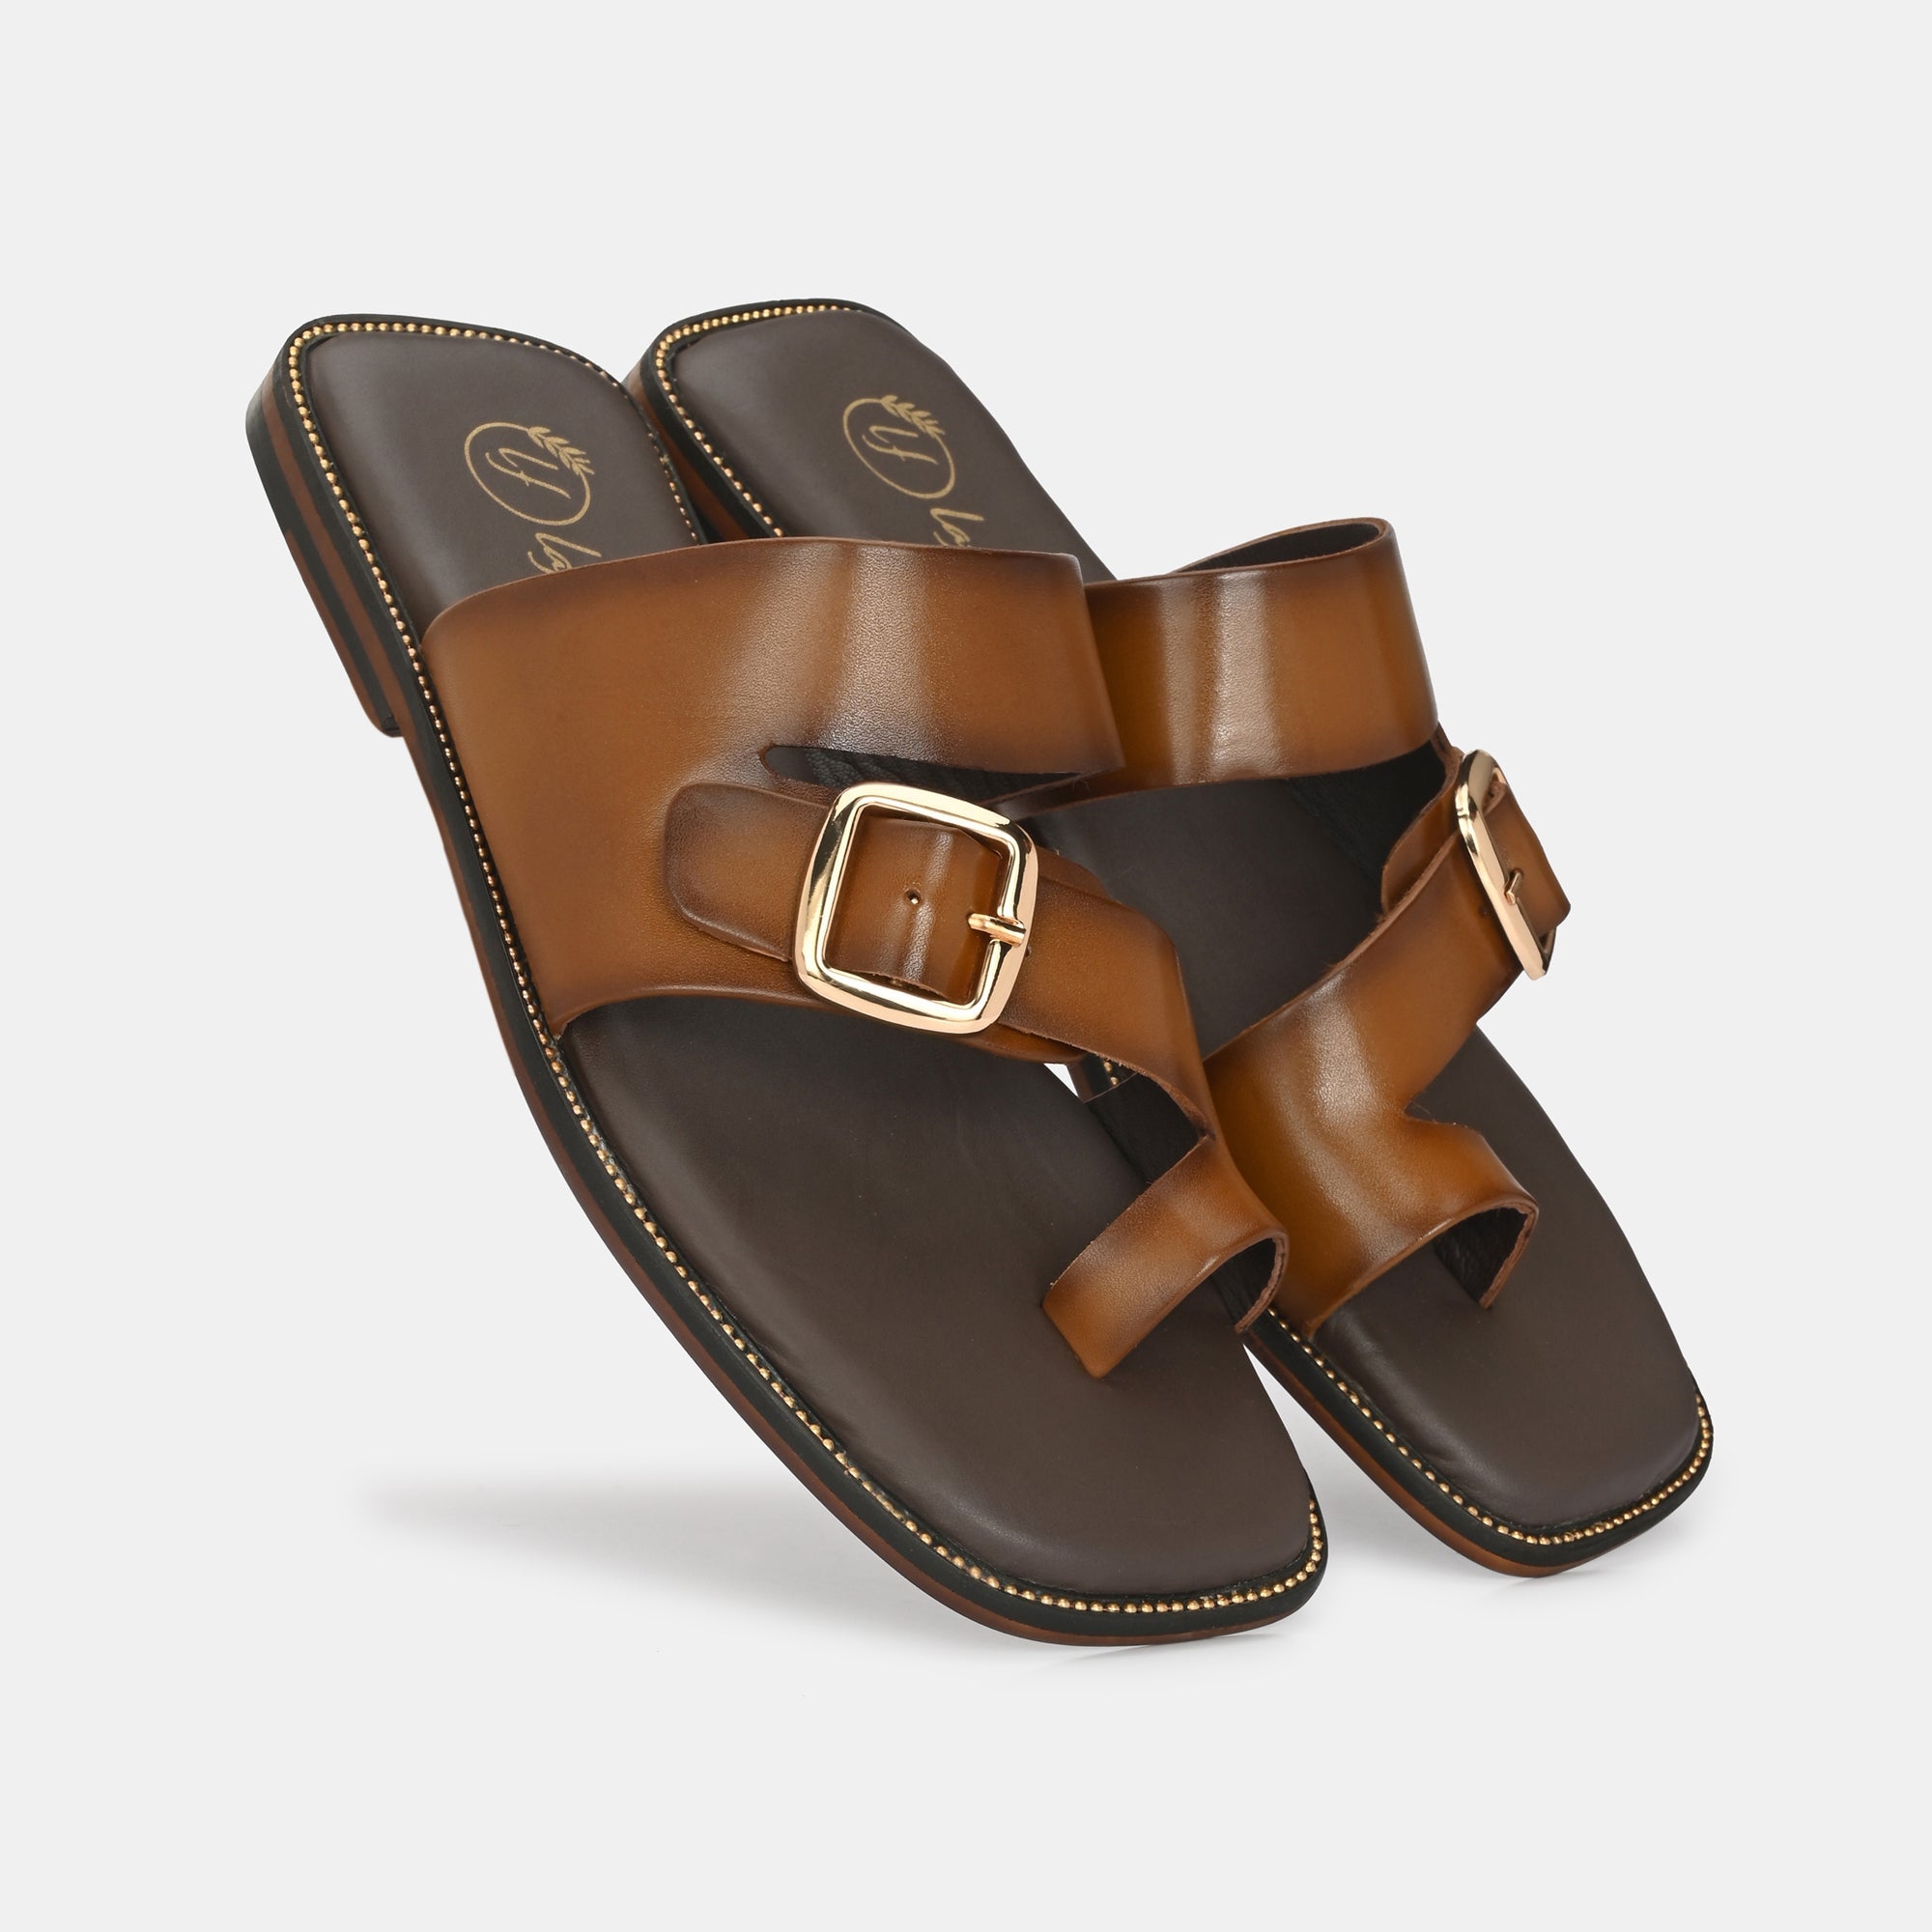 Tan Buckled Slippers by Lafattio